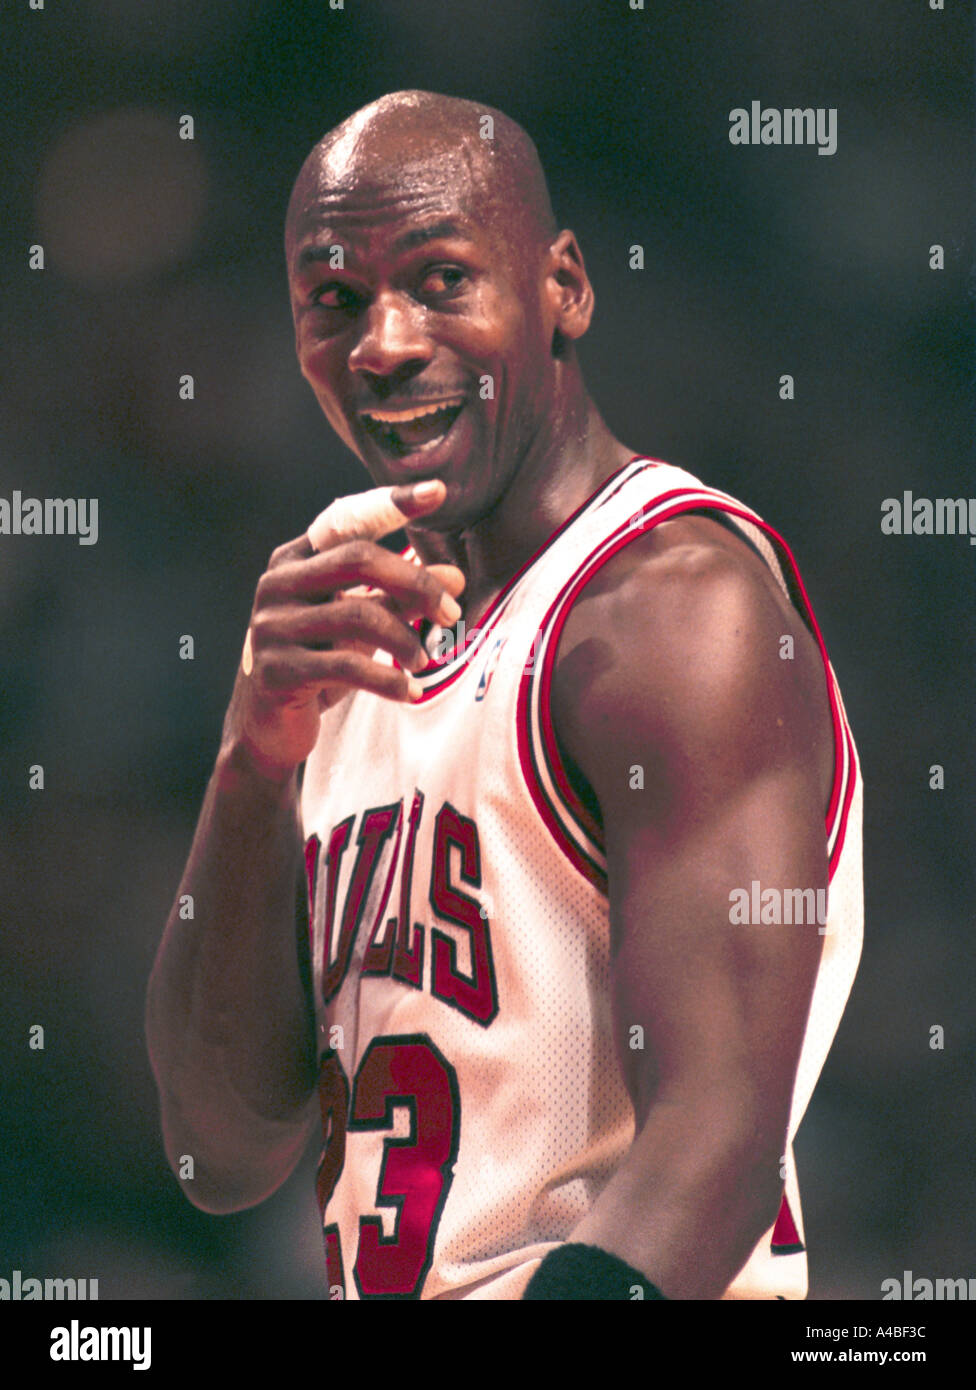 Chicago Bulls and NBA superstar Michael Jordan smiles during game action in 1995 Stock Photo